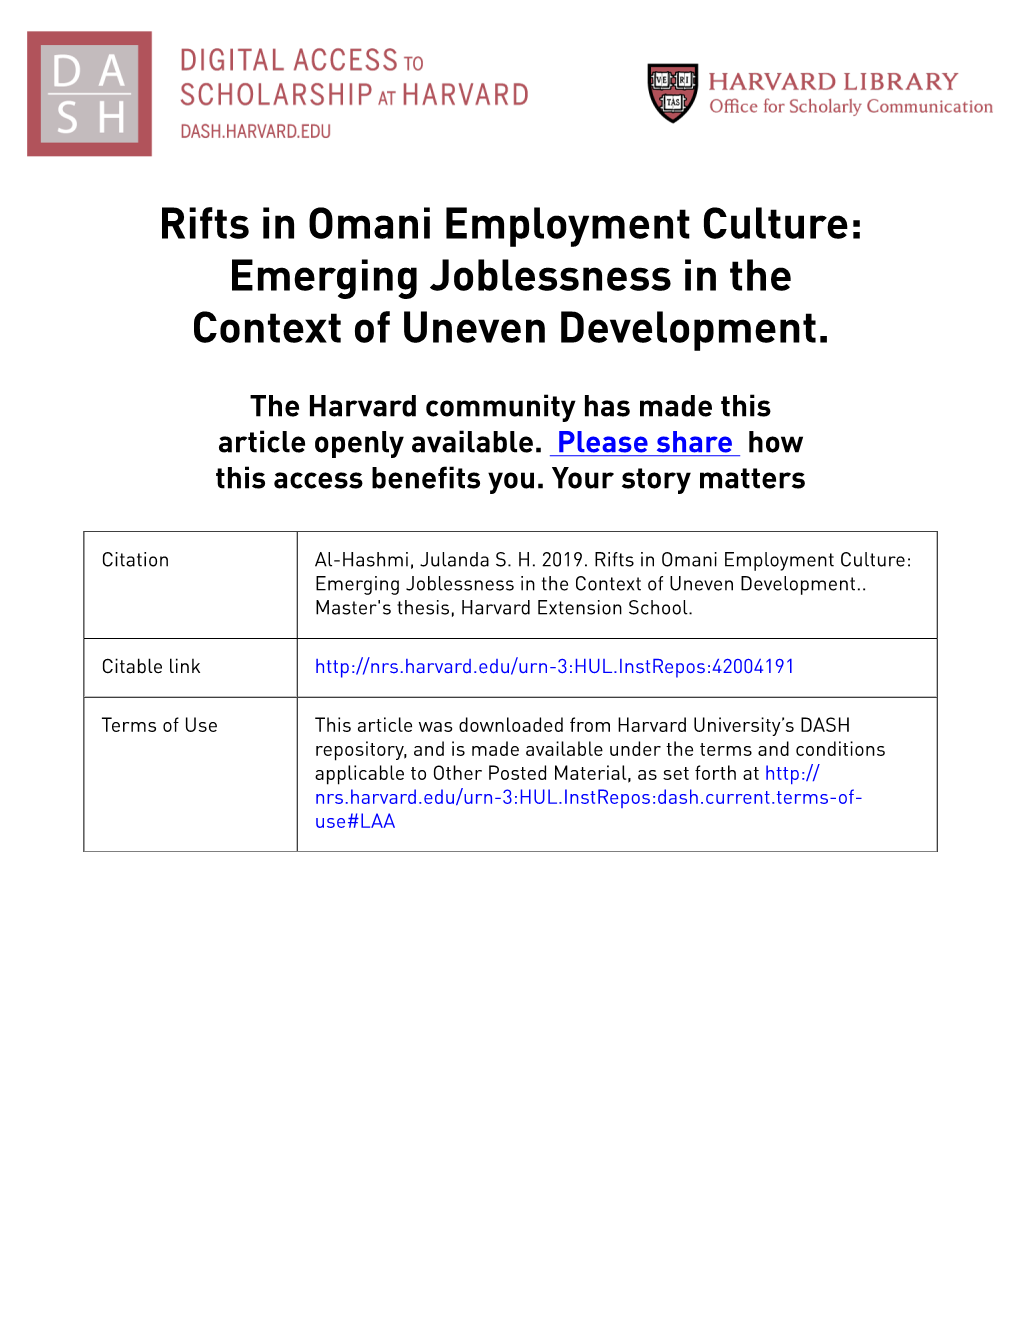 Rifts in Omani Employment Culture: Emerging Joblessness in the Context of Uneven Development